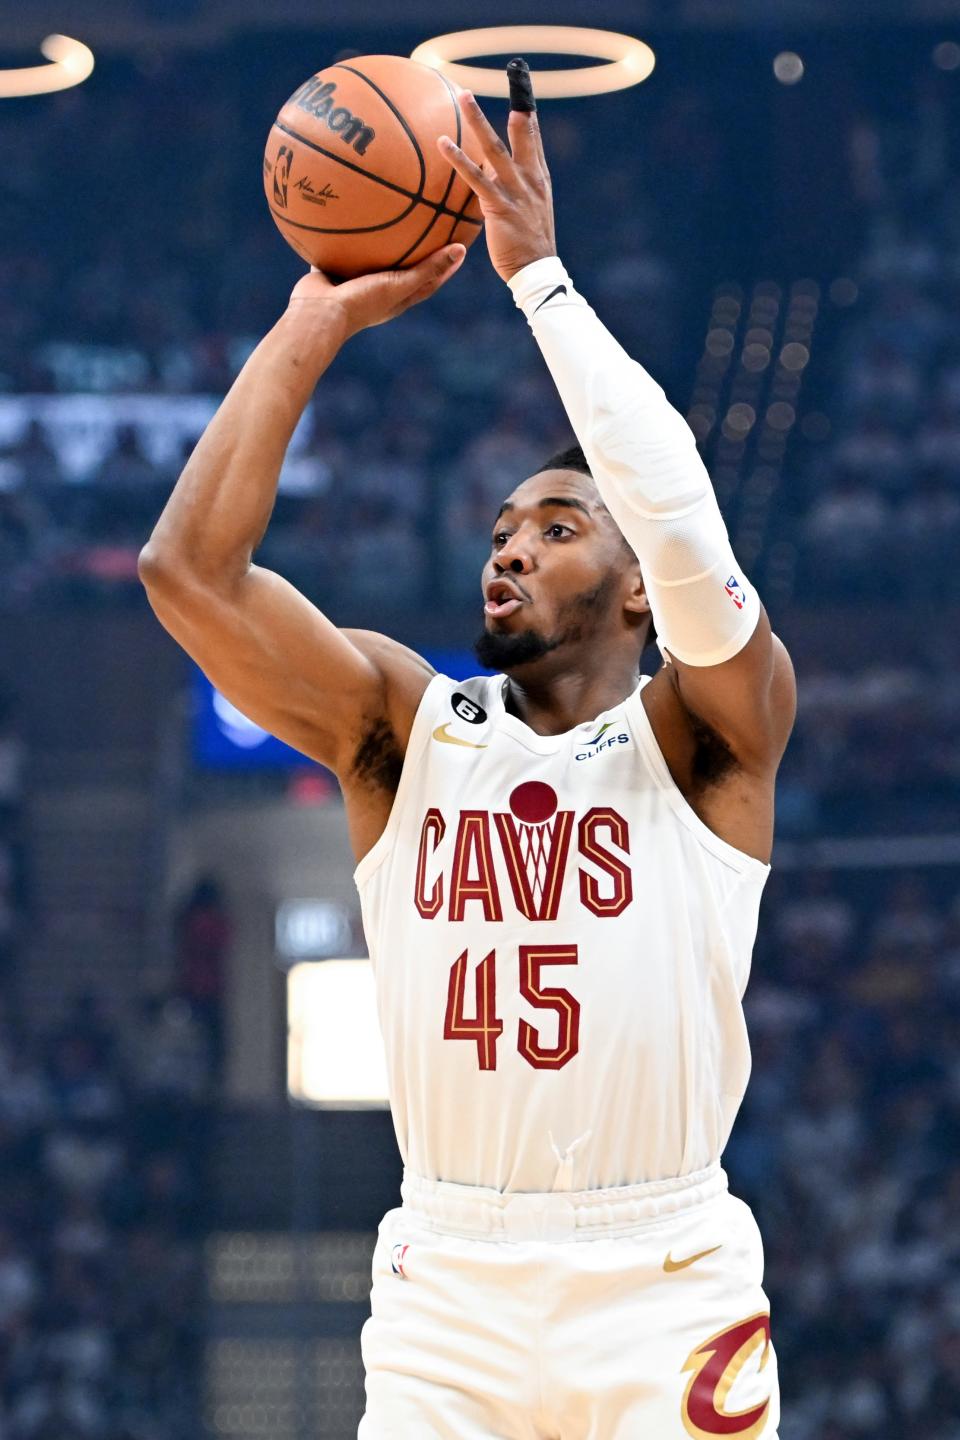 Cleveland Cavaliers' Donovan Mitchell shoots a 3-point basket against the New York Knicks during the first half of Game 1 in a first-round NBA basketball playoffs series Saturday, April 15, 2023, in Cleveland.